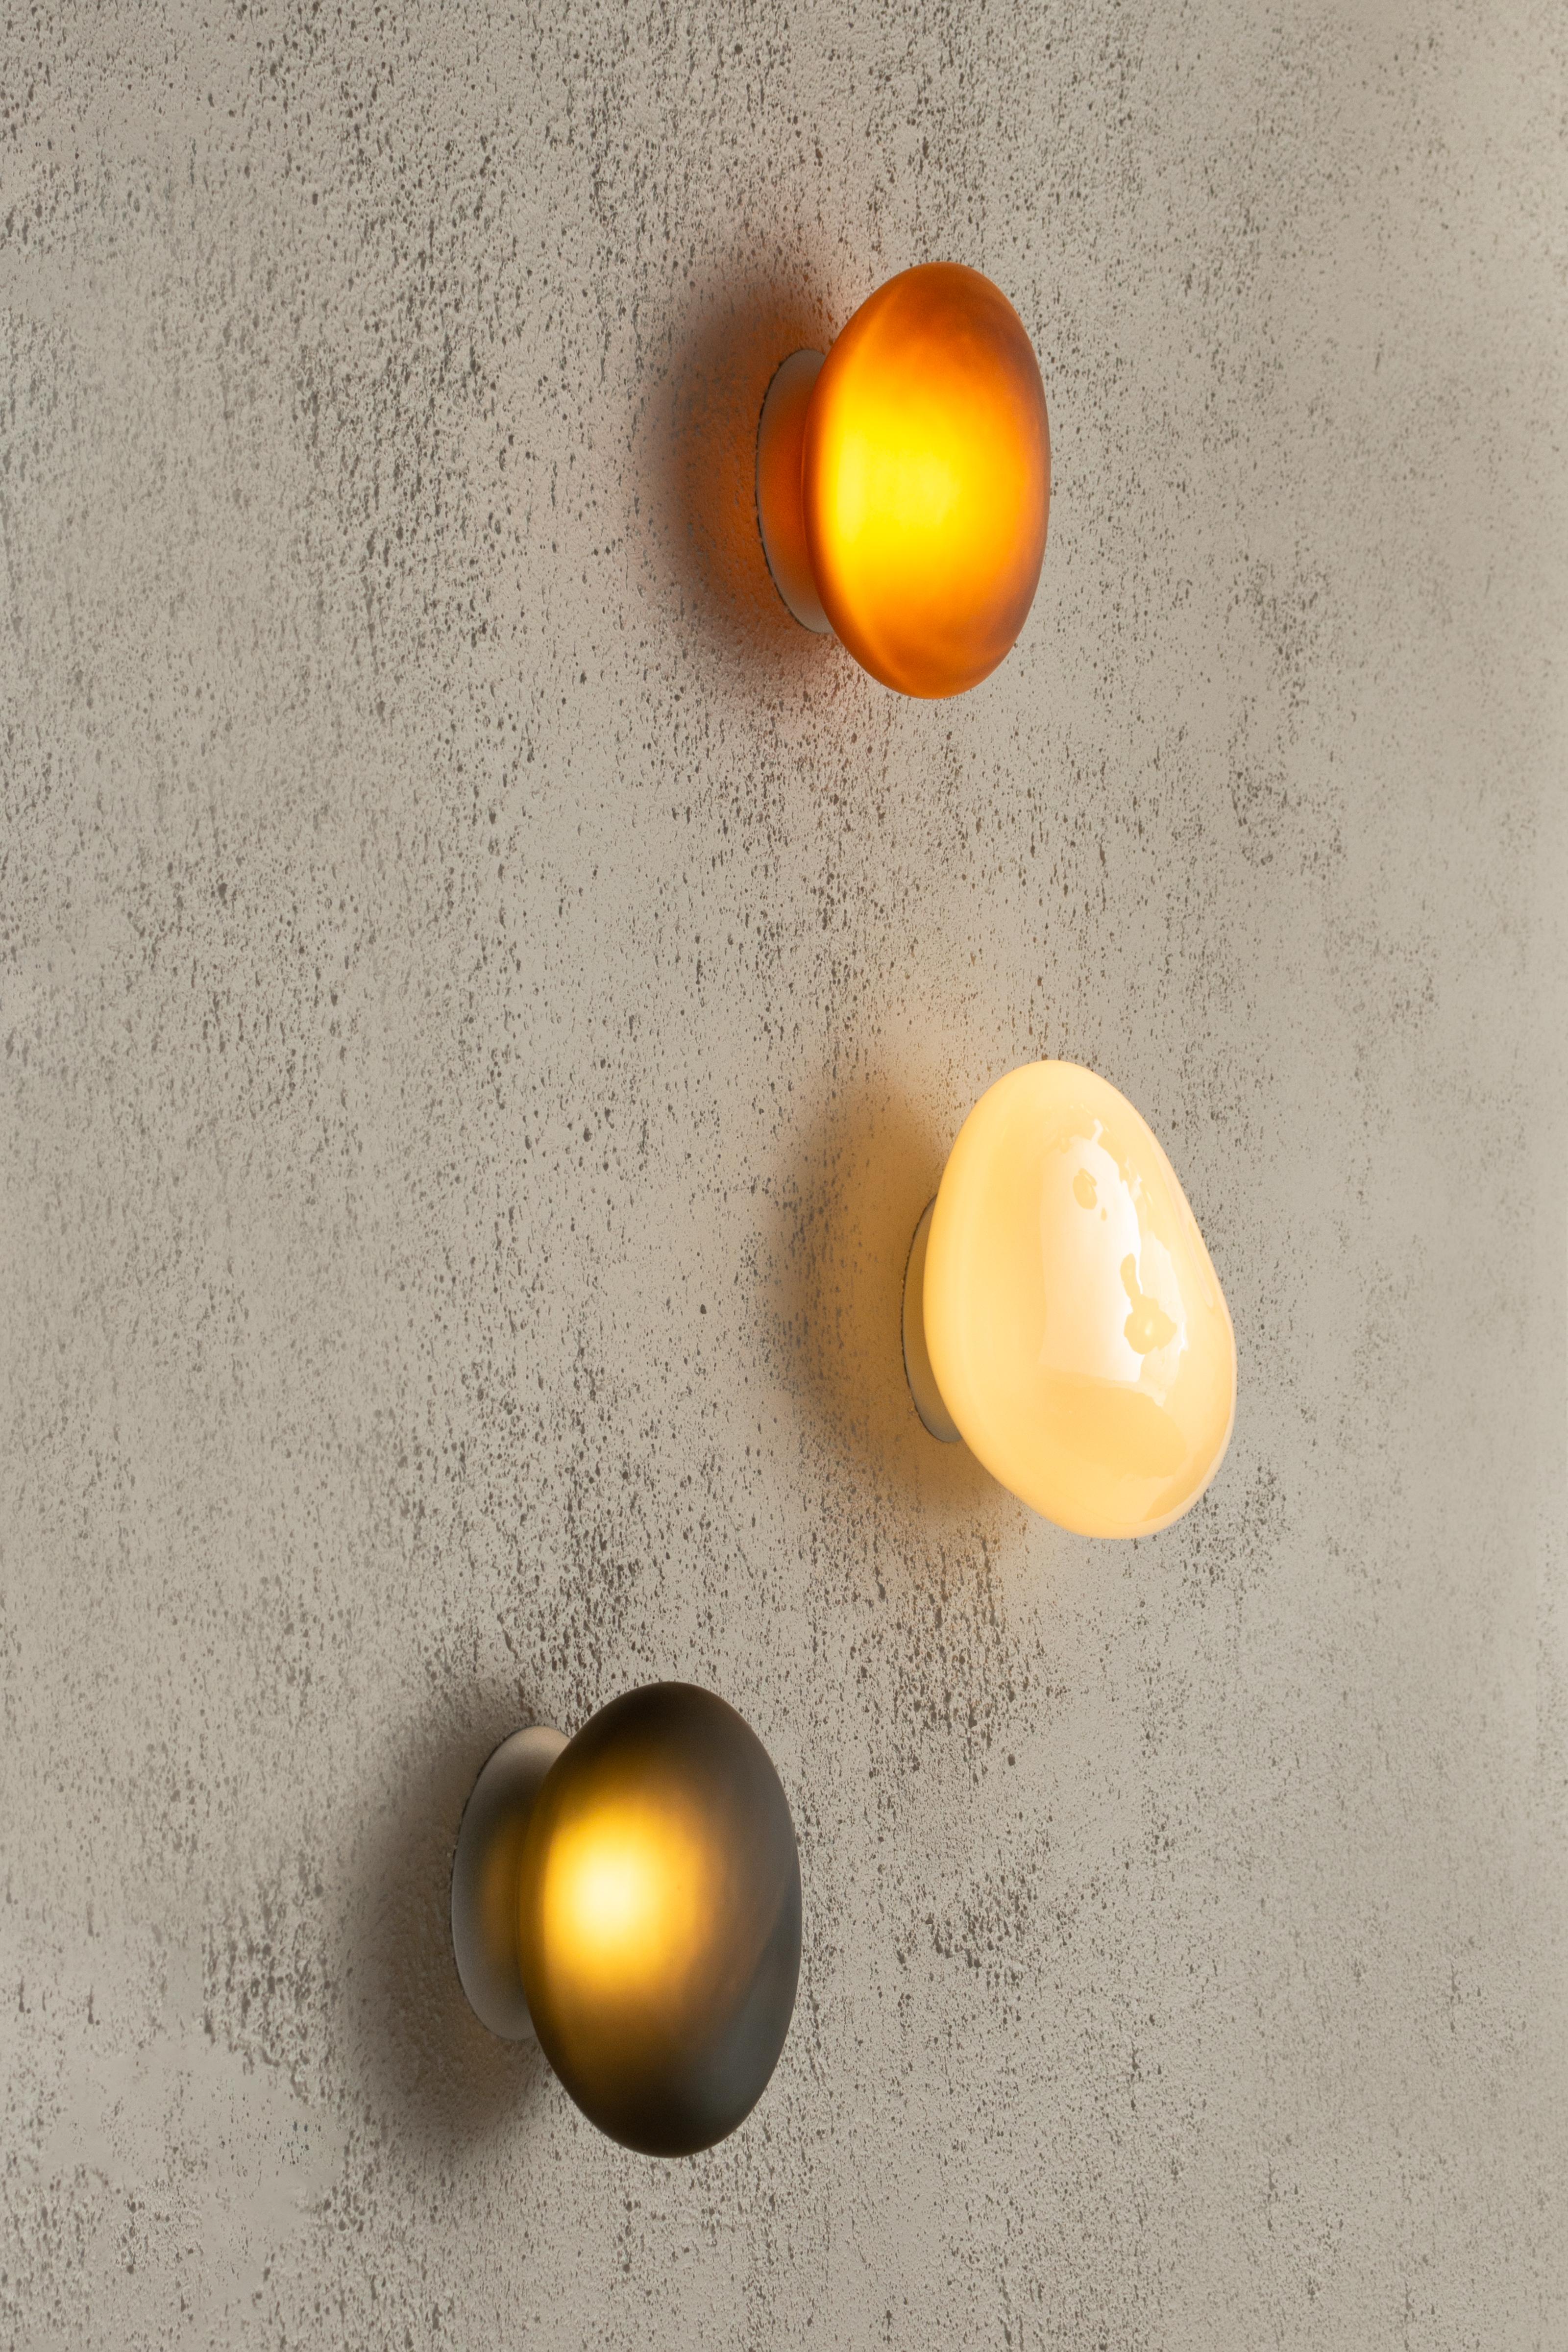 Contemporary wall lamp pebble 

Electrical : 
Voltage: 110 – 277V / 220 – 240V
Integral LED source : 1 x 4W LED

The model shown in picture:
Dimensions: C: 20 x 19 x 10 cm 
Color: Citrine
______
Pebble
The Pebble series celebrates the